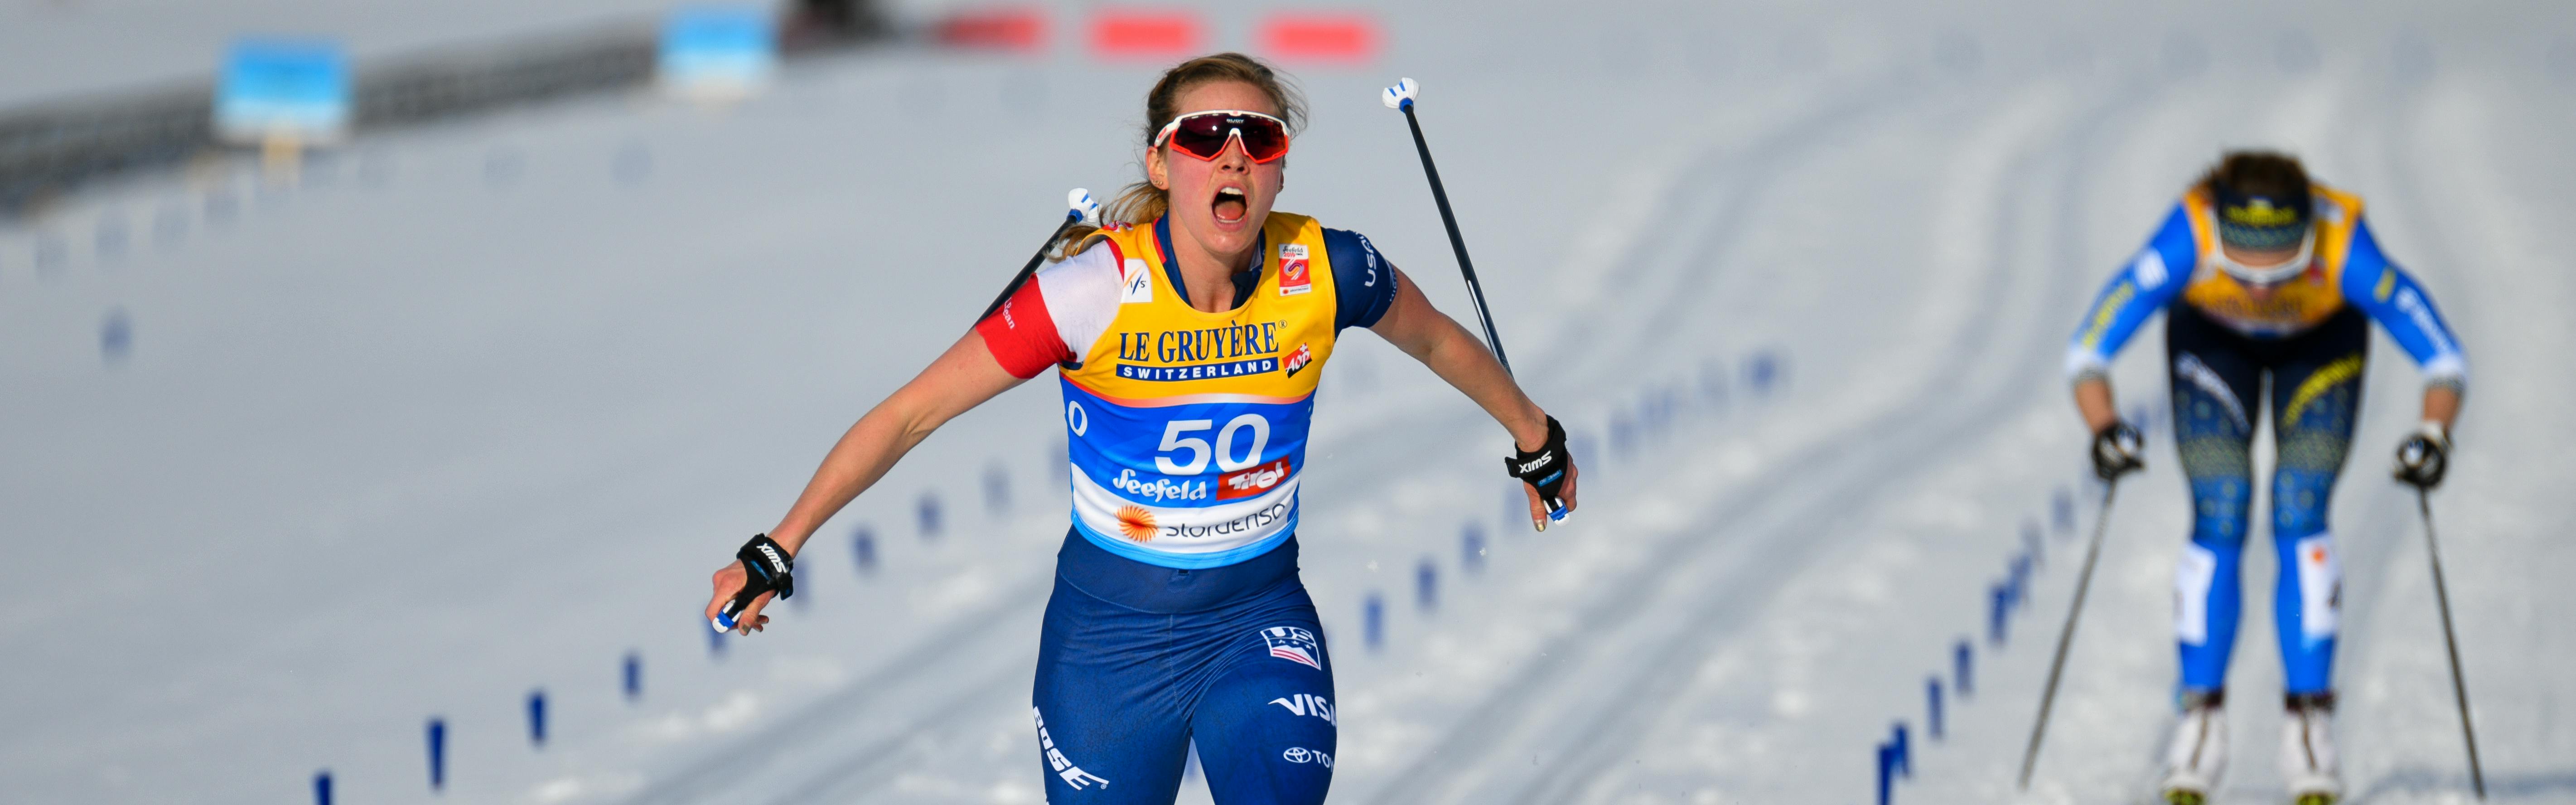 Jessie Diggins crosses the finish line at the 2019 Nordic World Ski Championships and shouts in celebration. 